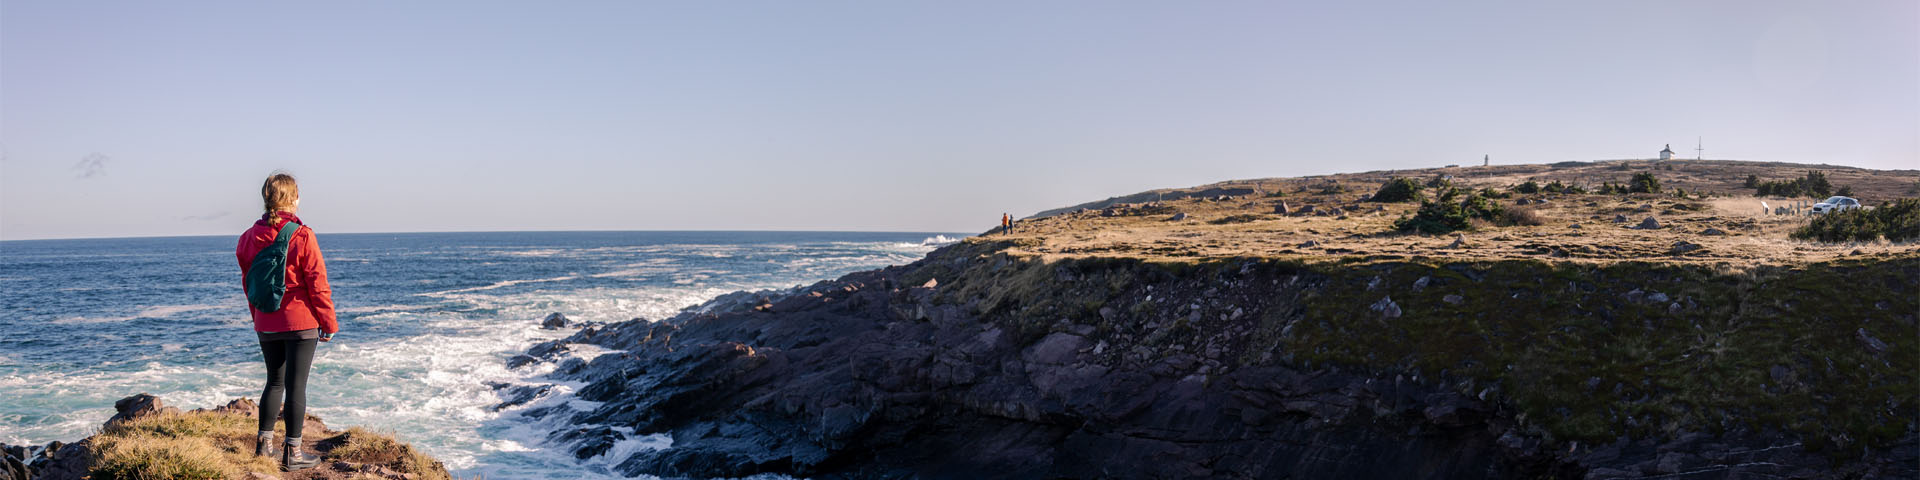 an individual standing on a coastal trail overlooking the ocean